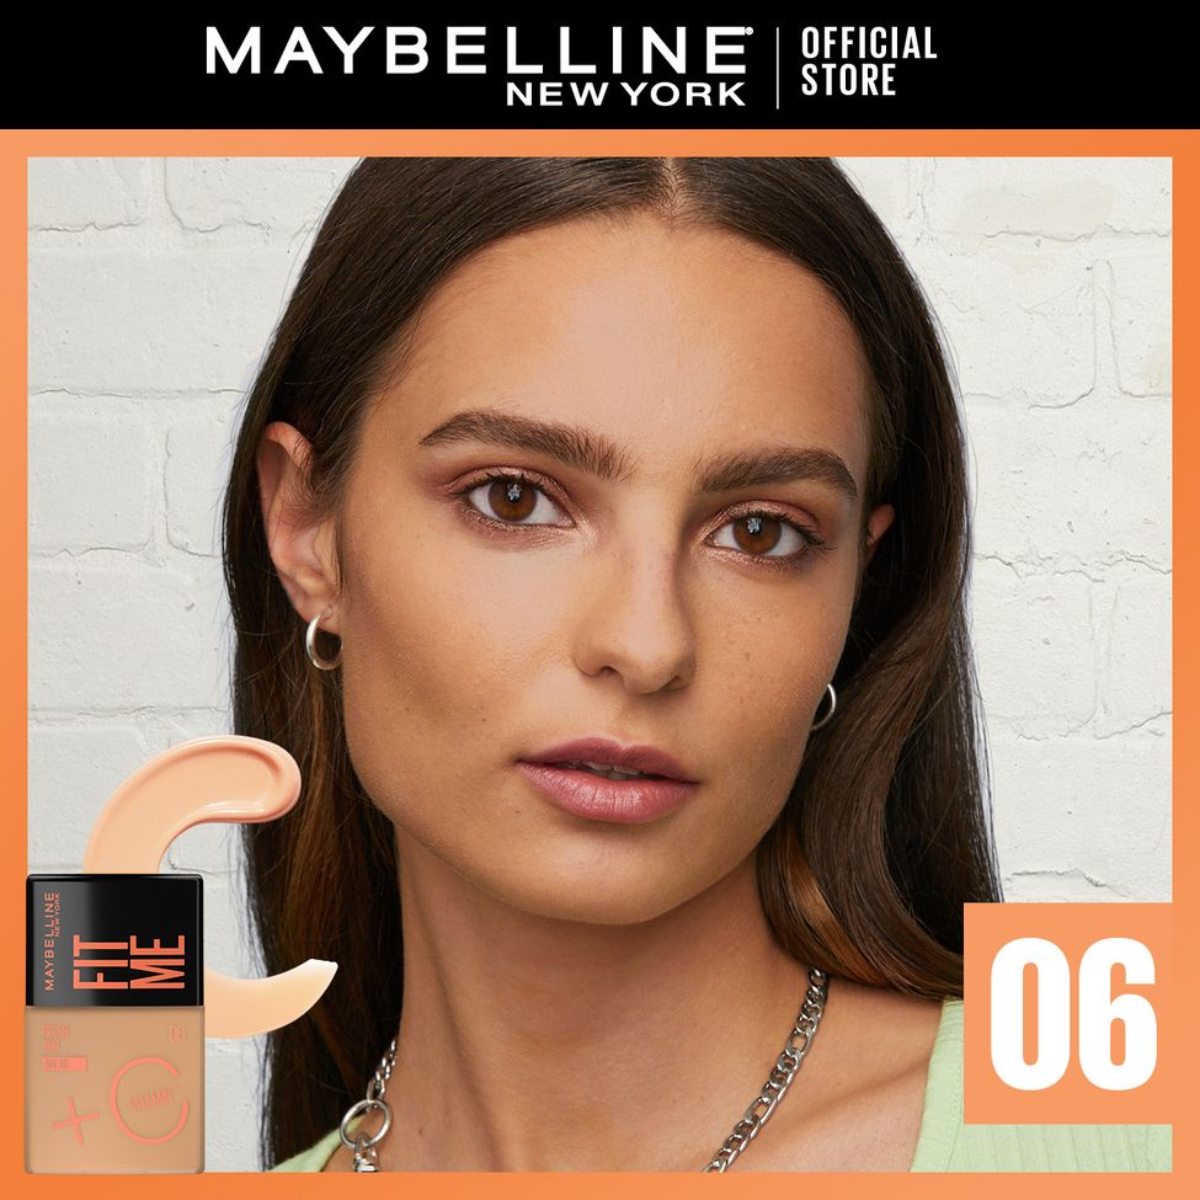  Maybelline Maquillaje